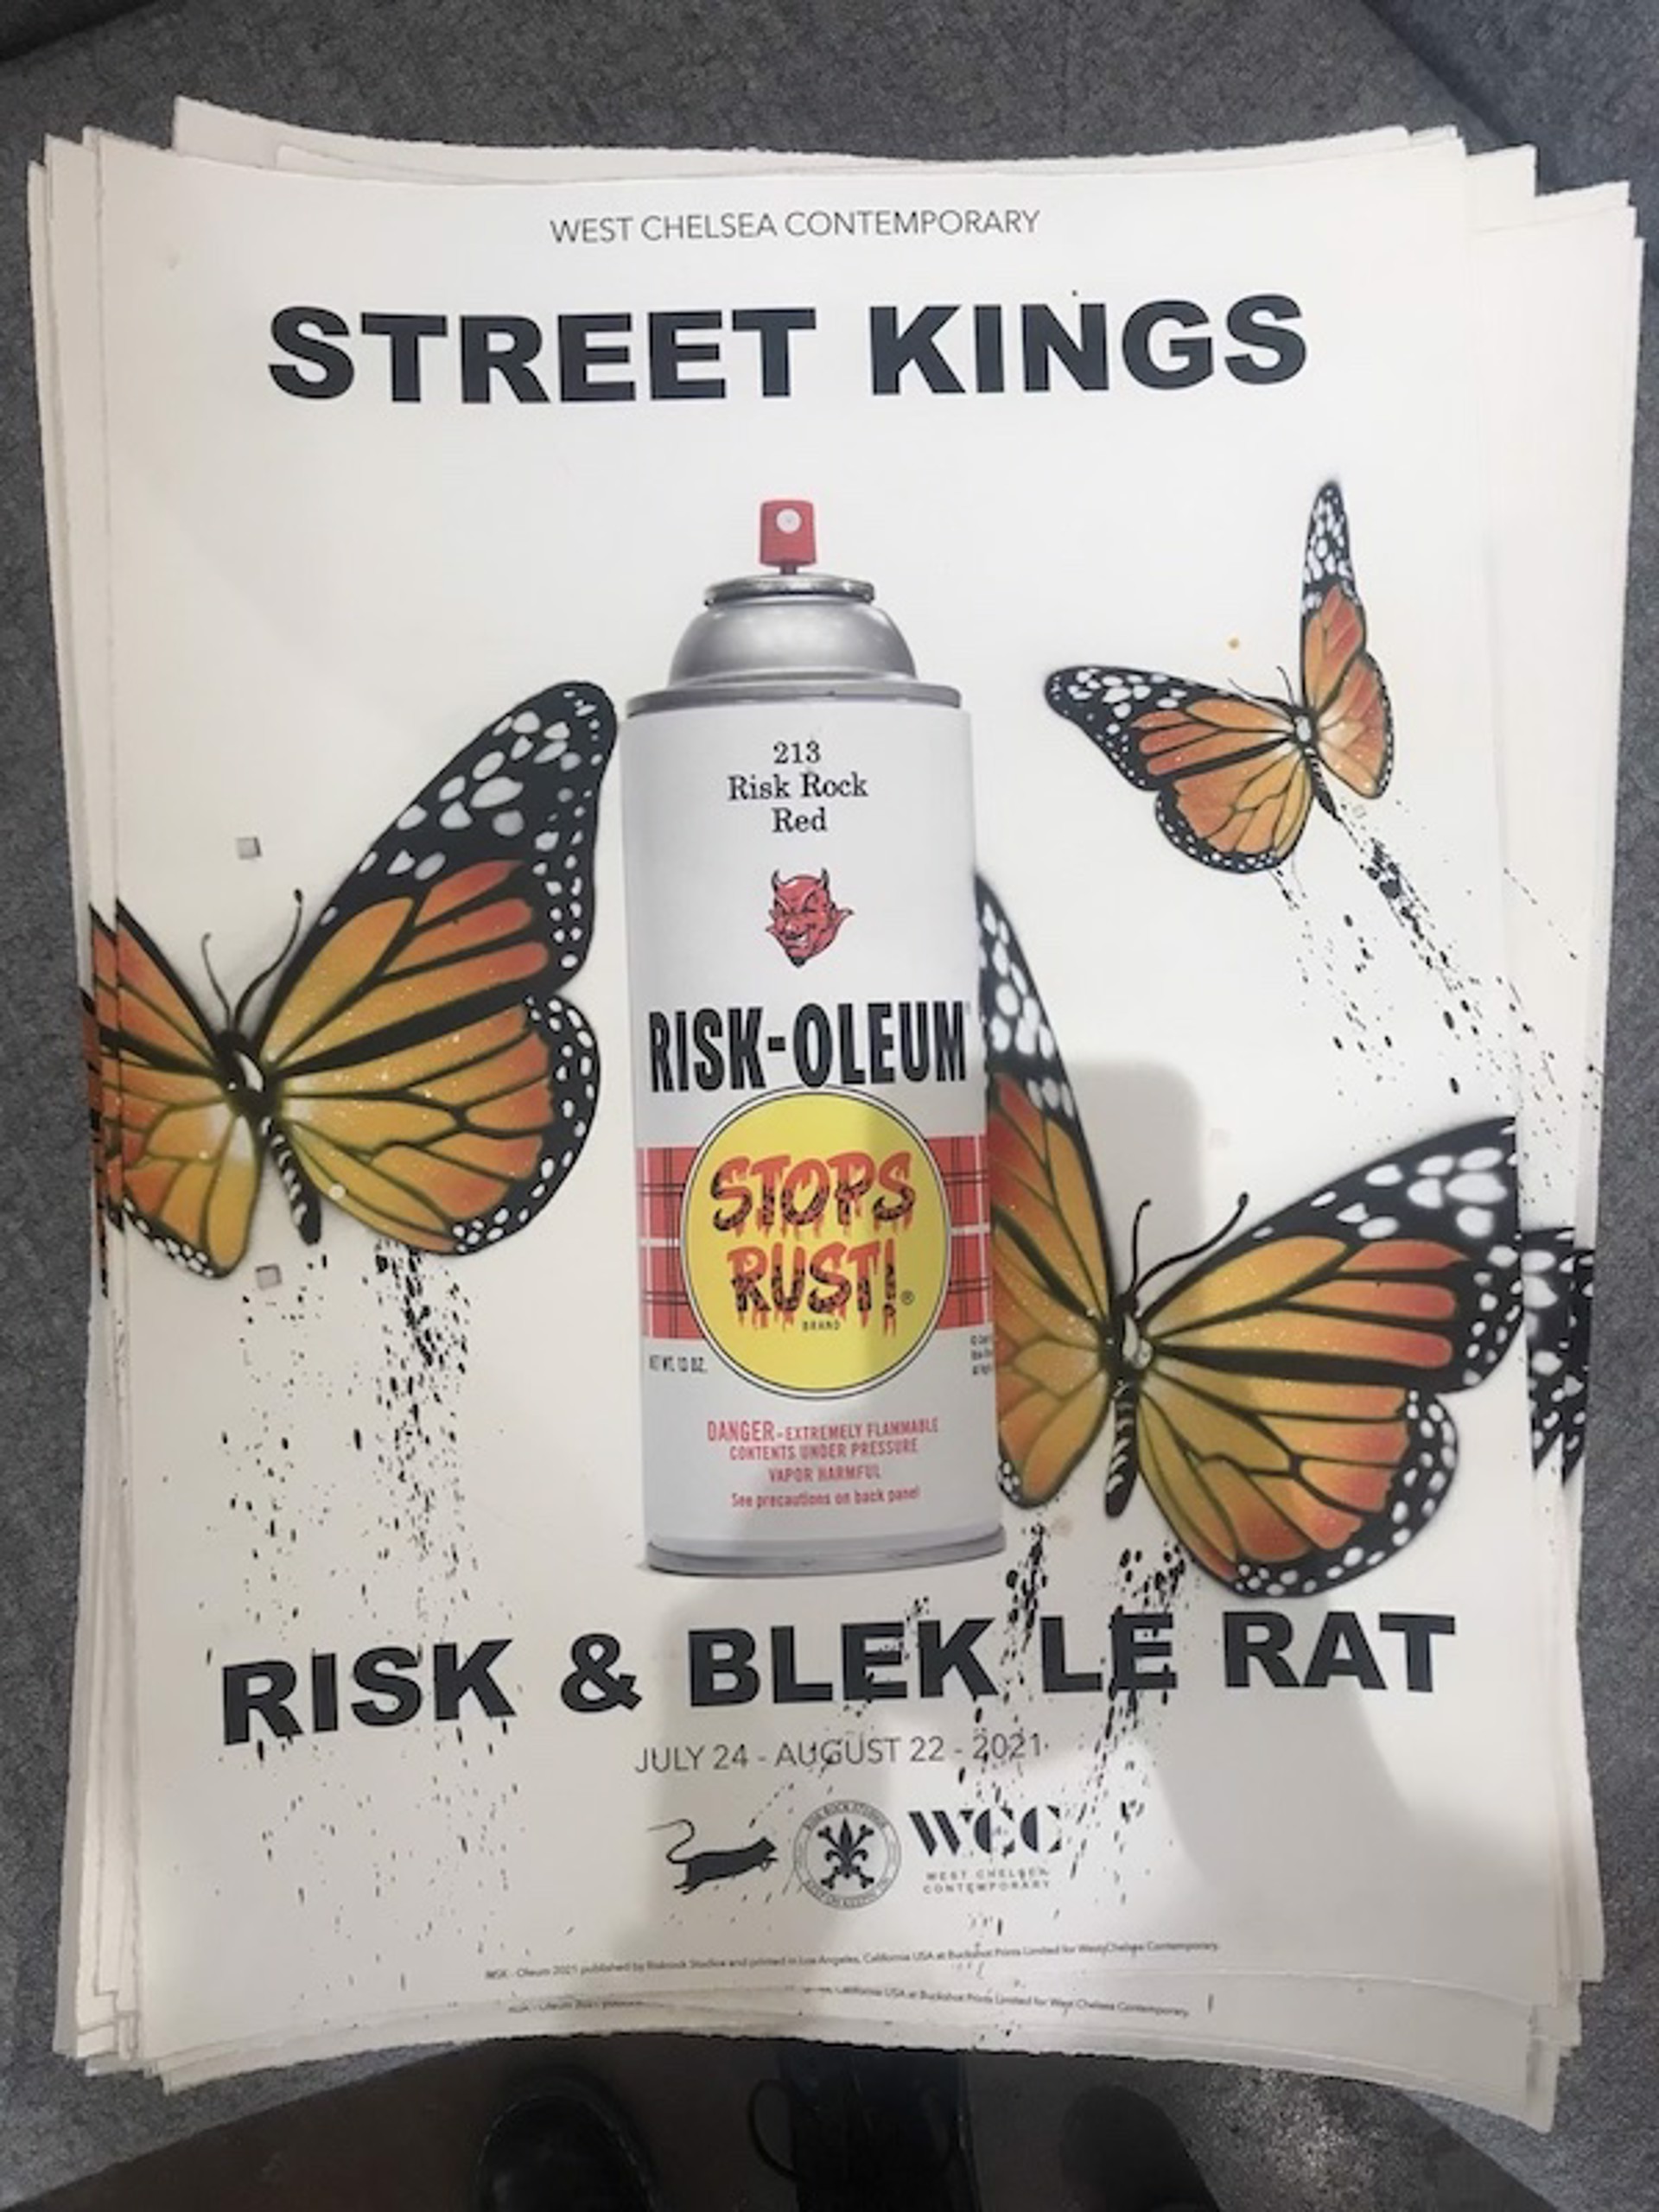 Street Kings Show Print (32/50) by Risk